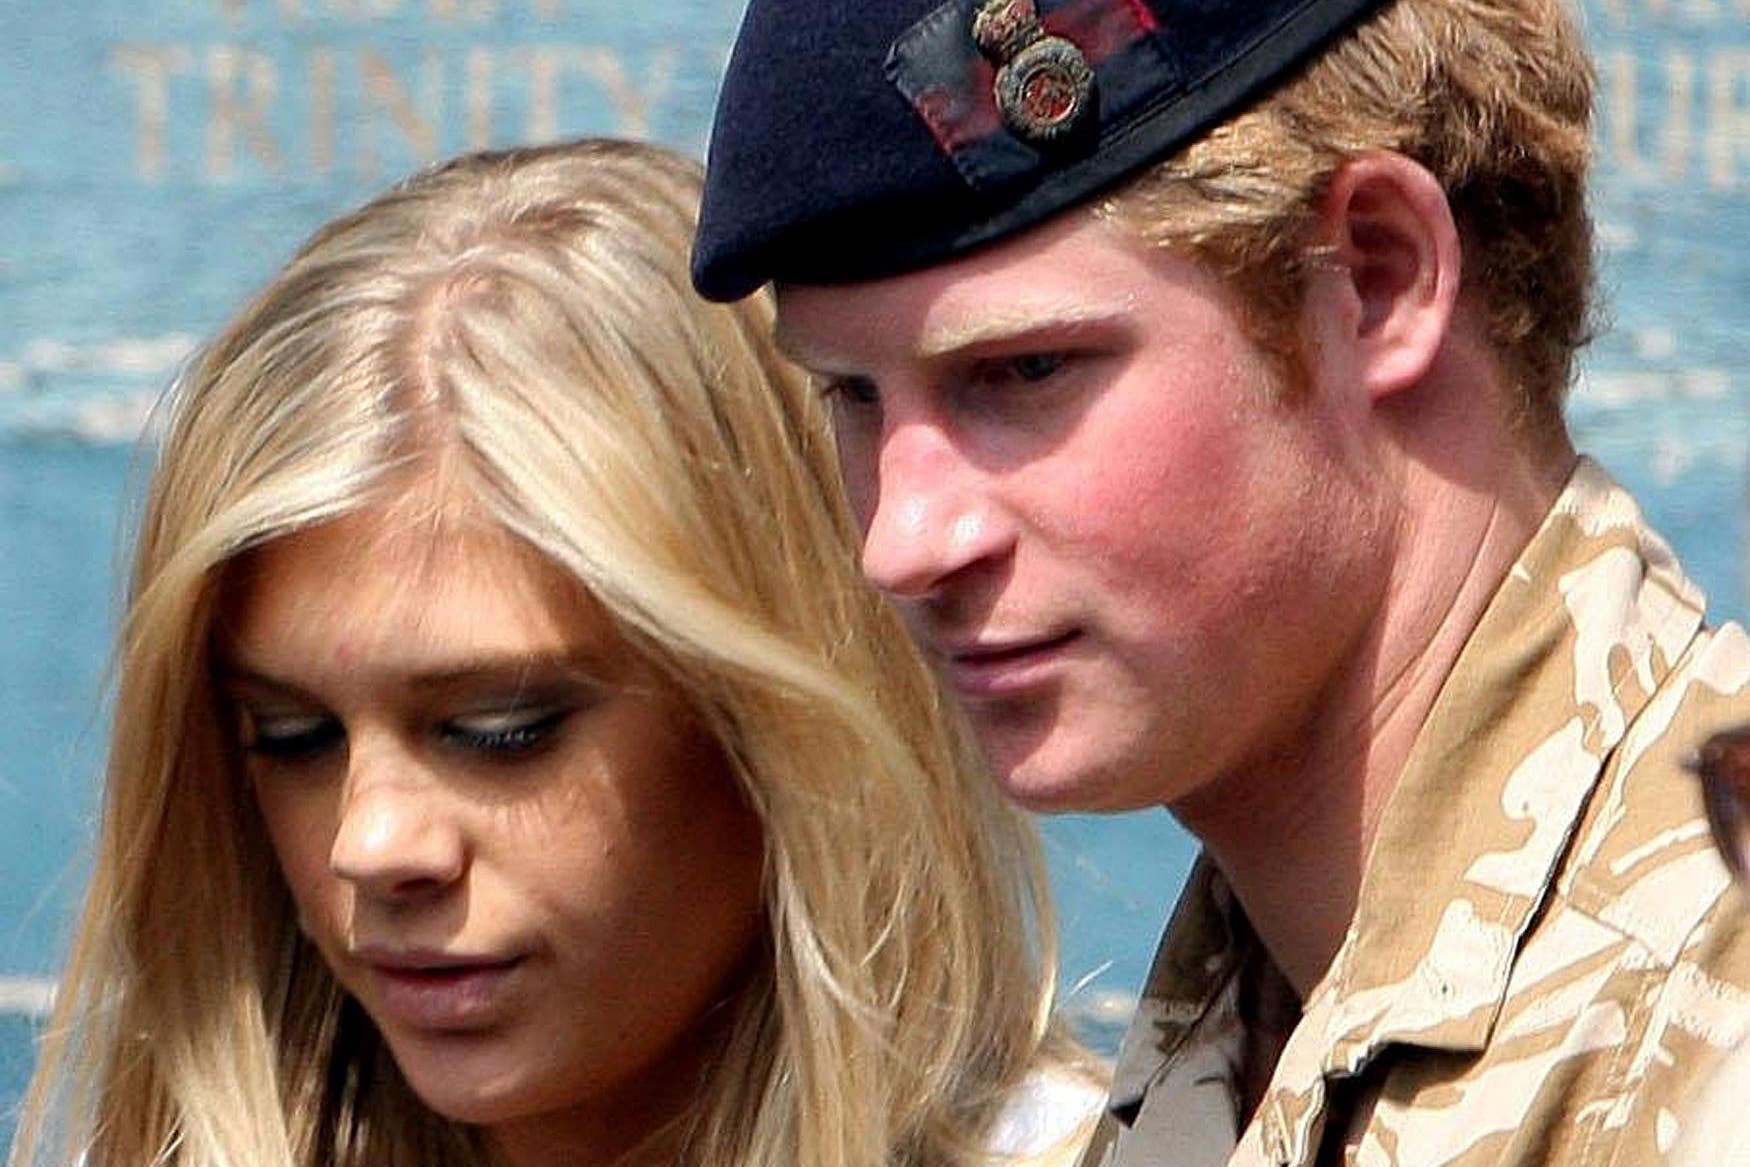 Prince Harry with his then-girlfriend Chelsy Davy